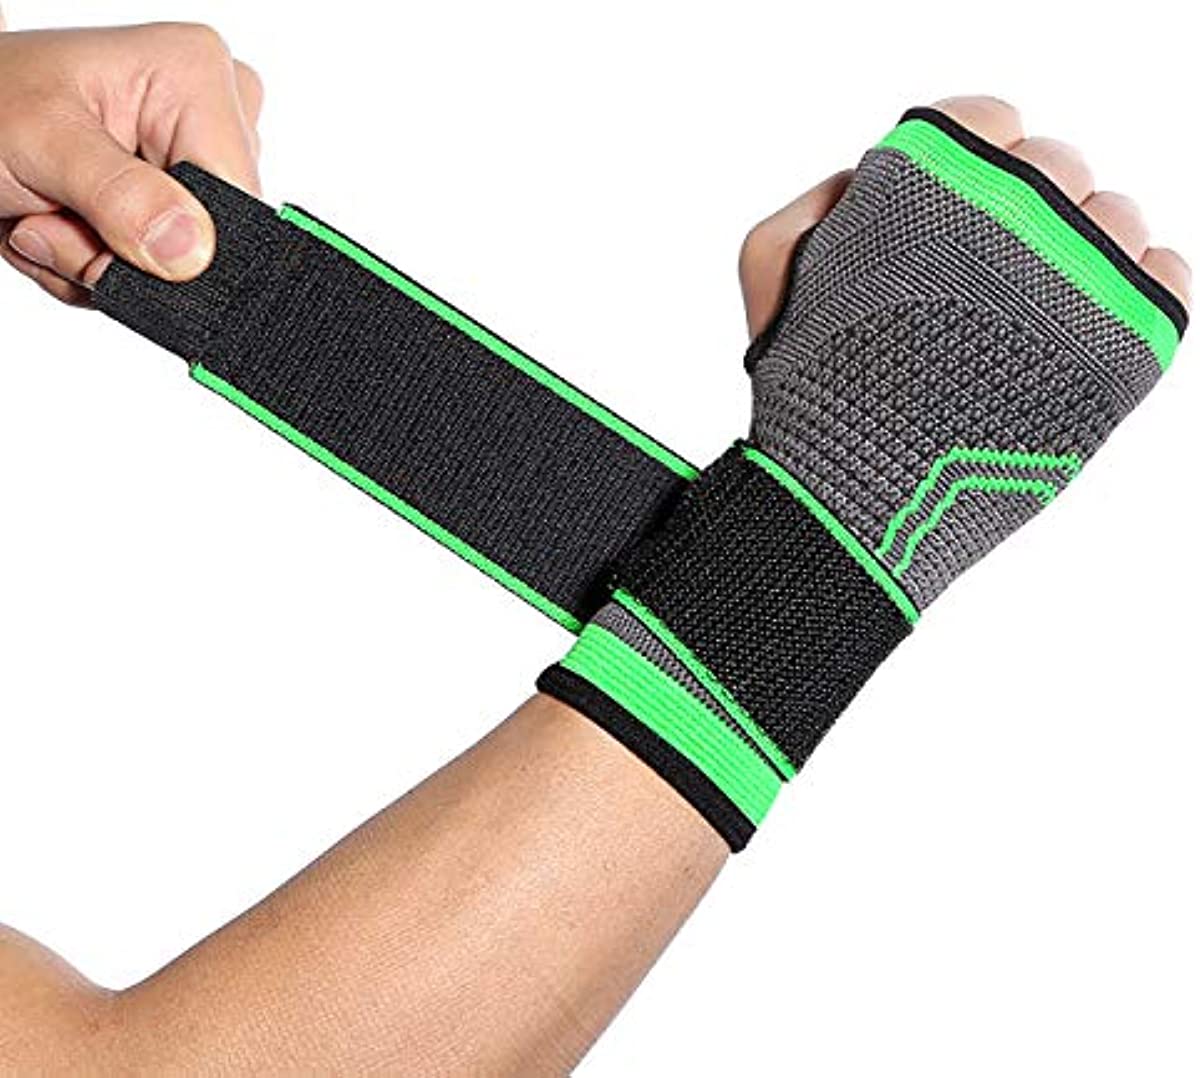 HiRui 2-Pack Wrist Brace Wrist Wrap, Wrist Strap Hand Compression Sleeves Support for Fitness Weightlifting MTB Tendonitis Sprains Recovery, Carpal Tunnel Arthritis, Pain Relief (Green, Medium)